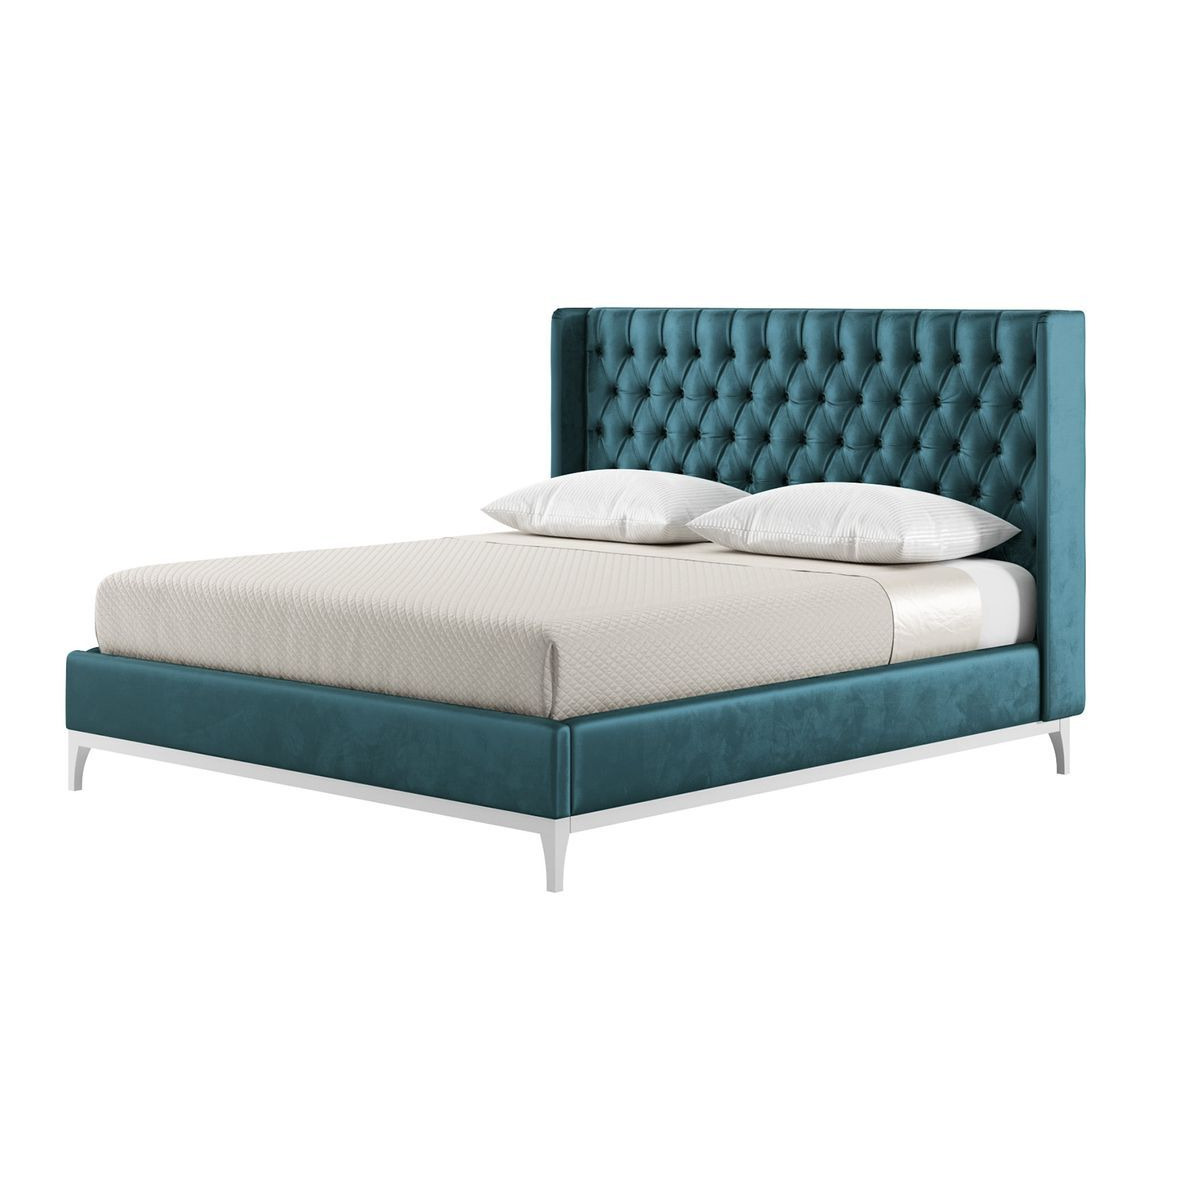 Marlon 6ft Super King Size Bed Frame with luxury deep button quilted wing headboard, dirty blue, Leg colour: white - image 1